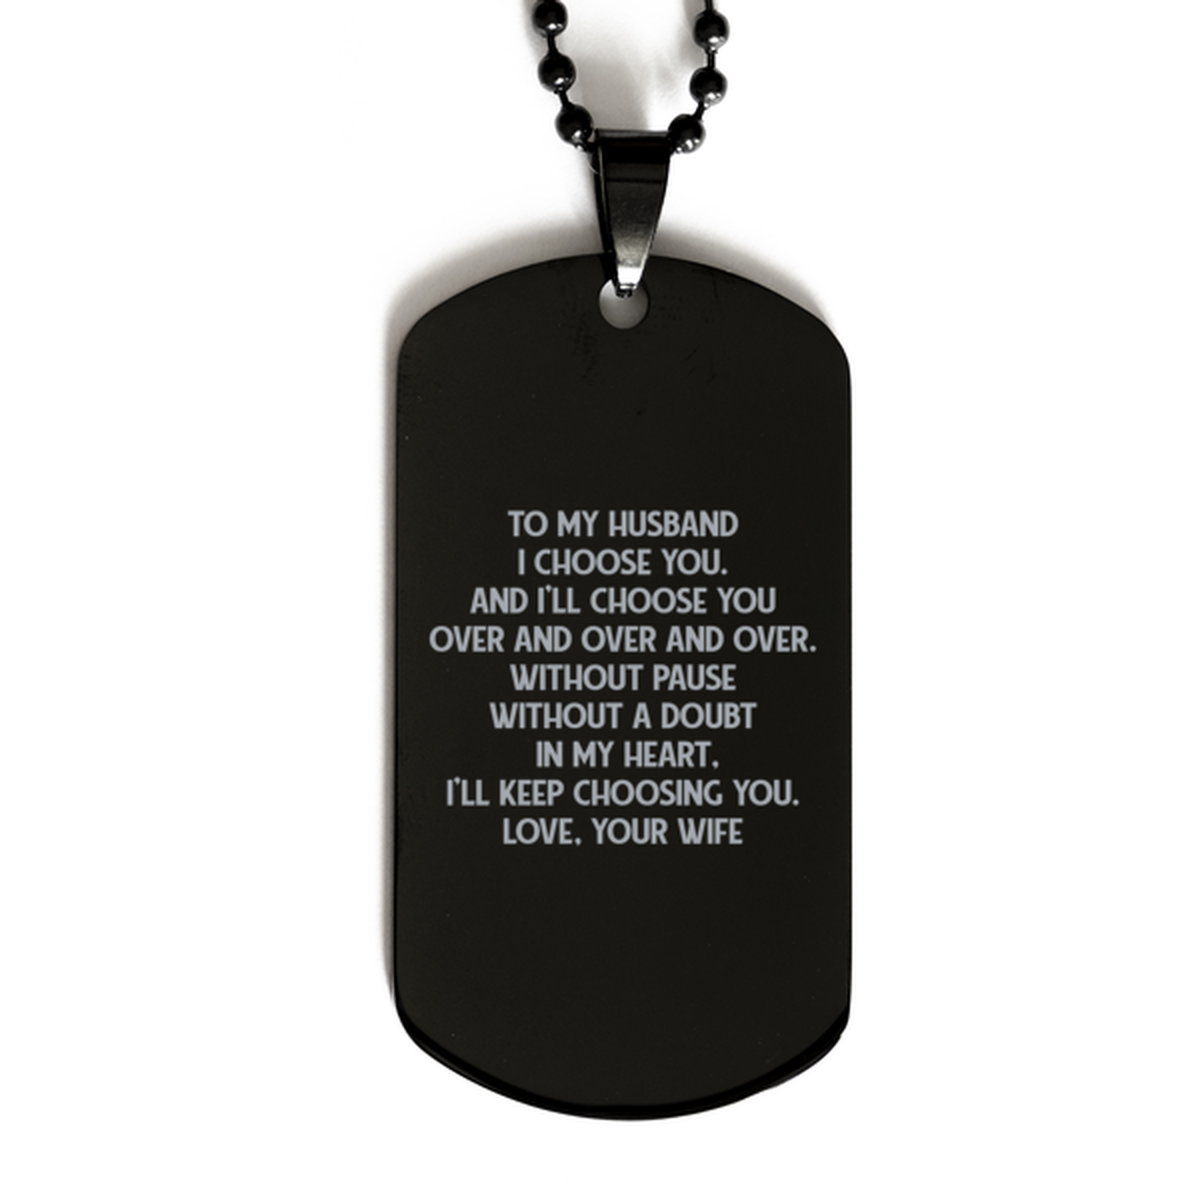 To My Husband Black Dog Tag, I'll Keep Choosing You, Anniversary Gifts For Husband From Wife, Birthday Gifts For Men